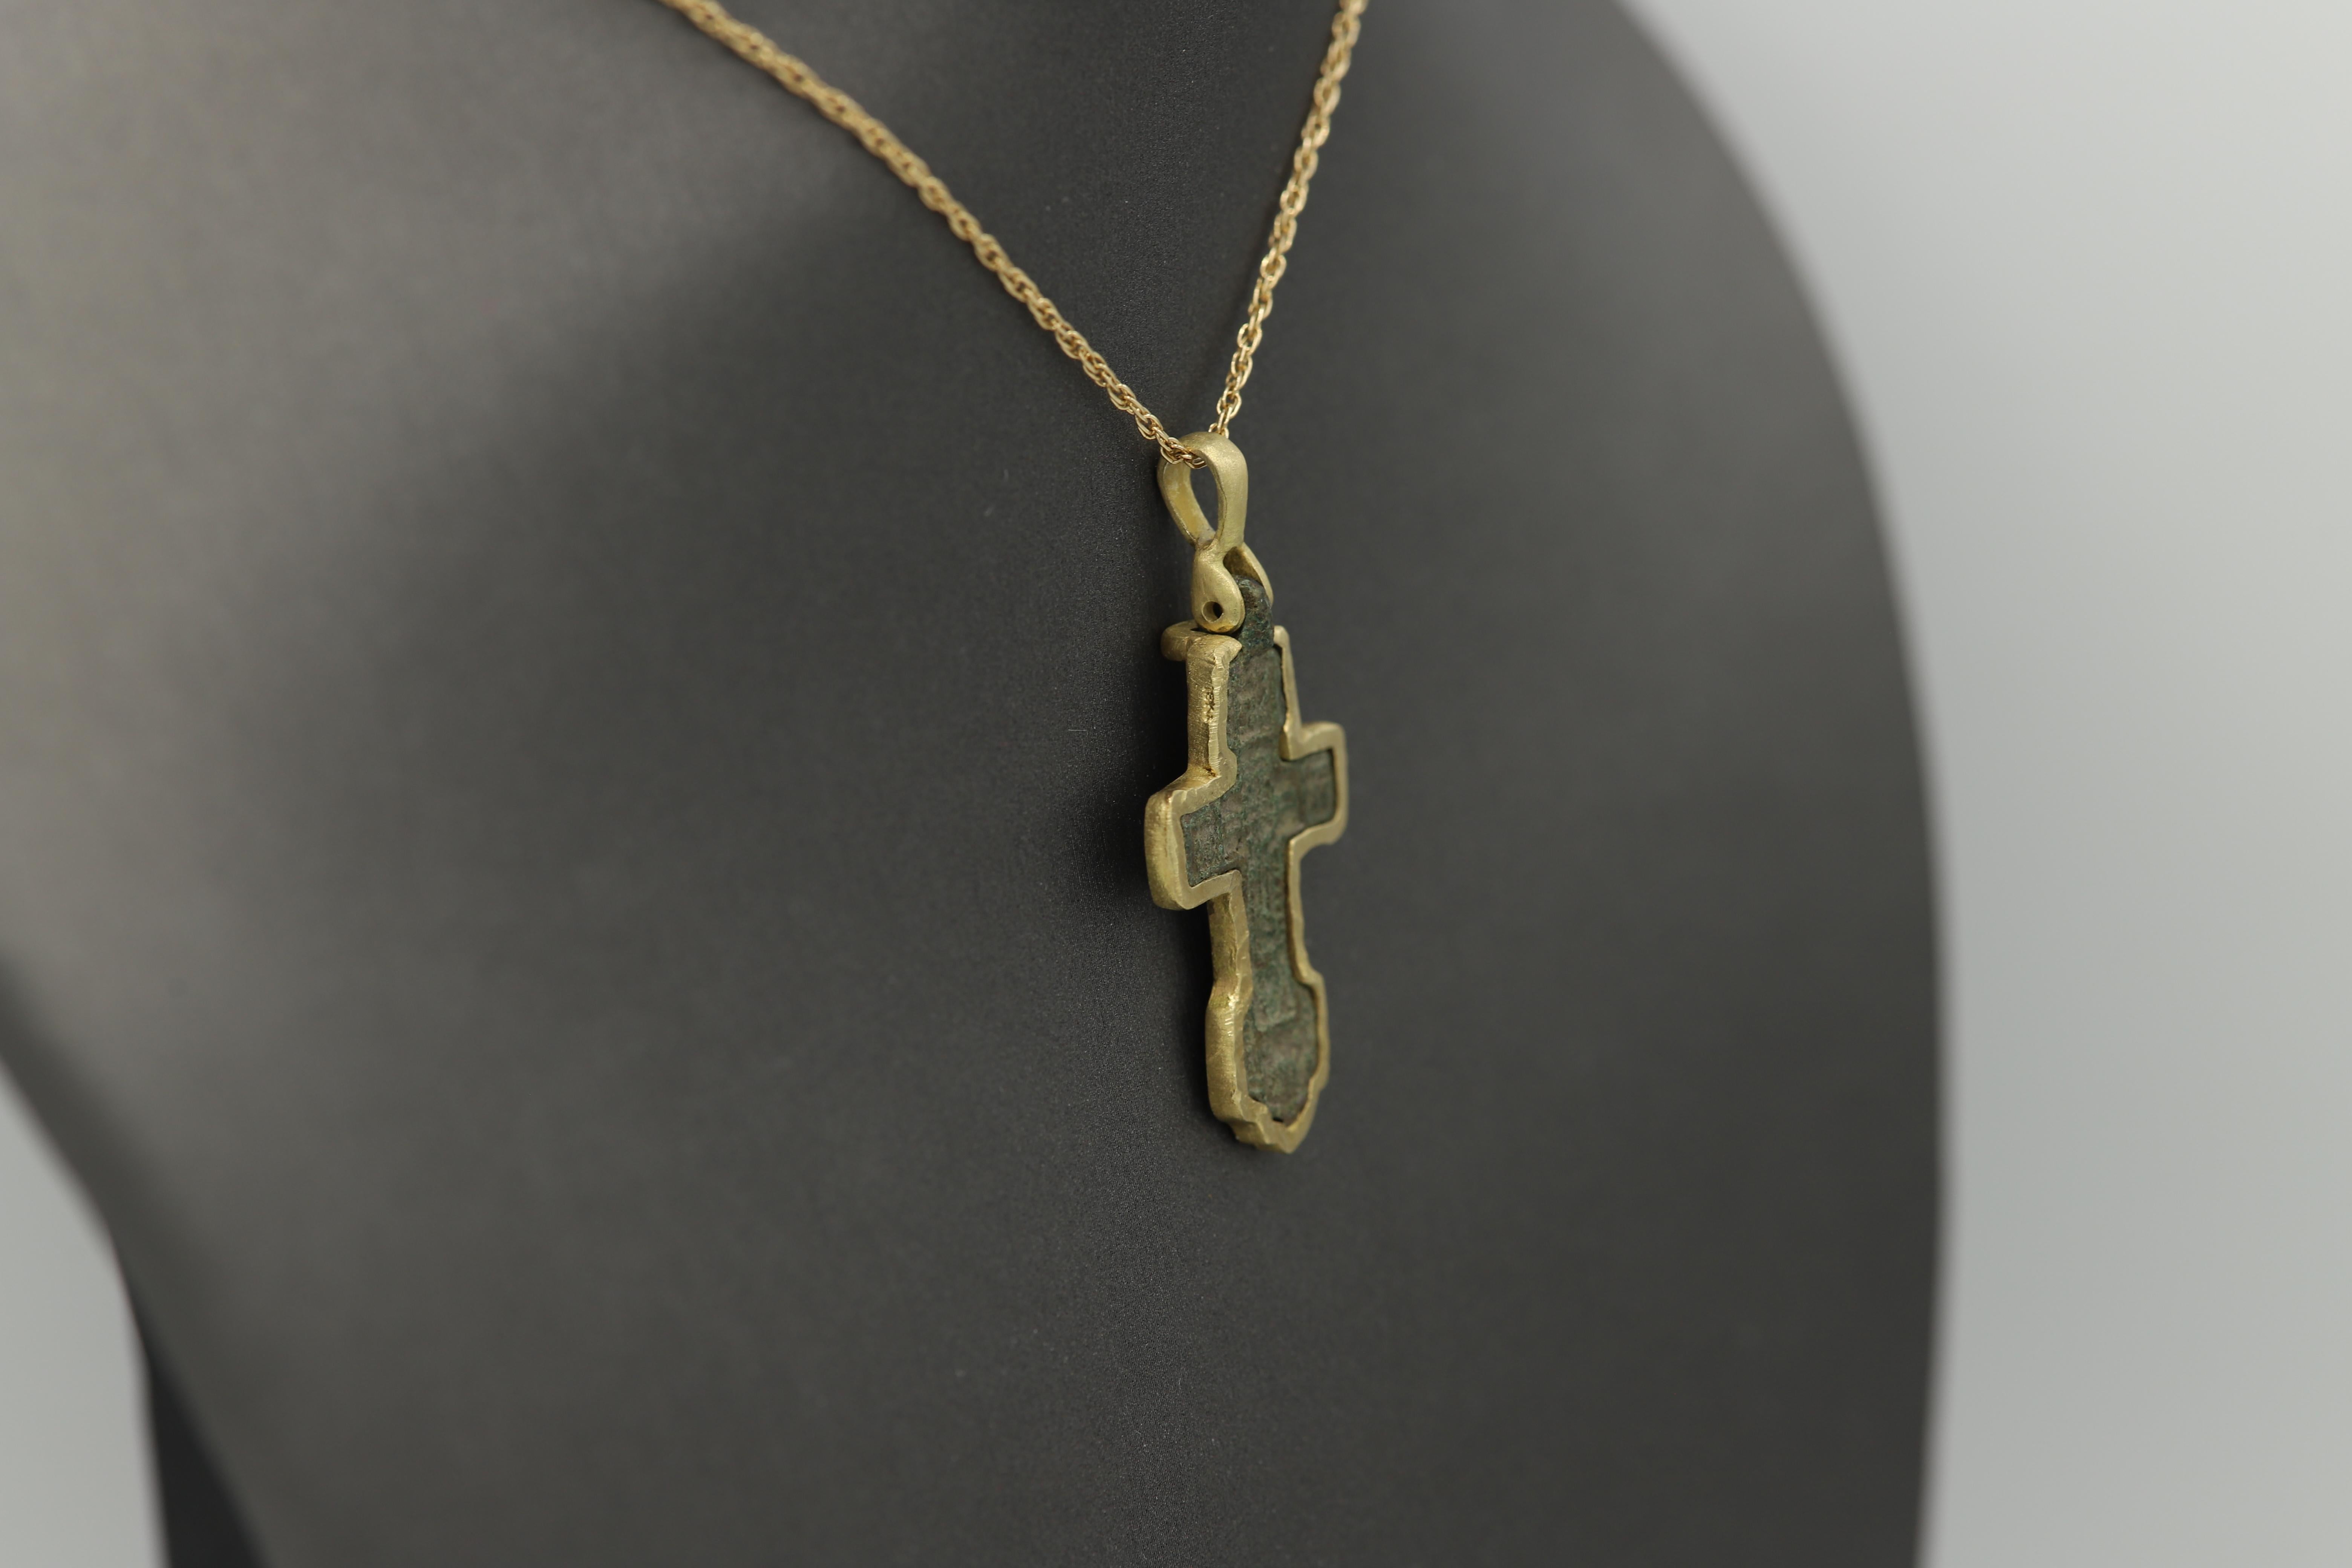 Hand Set in Italy. Antique Byzantine Period Cross hand set in 18k Yellow Gold.
Approx size 1.25' inch or 30 mm.
Estimate from the 600-900 AD 
Included 16' or 18' Inch Gold chain (please remember to note your preference).

The uniting of Greek, Roman